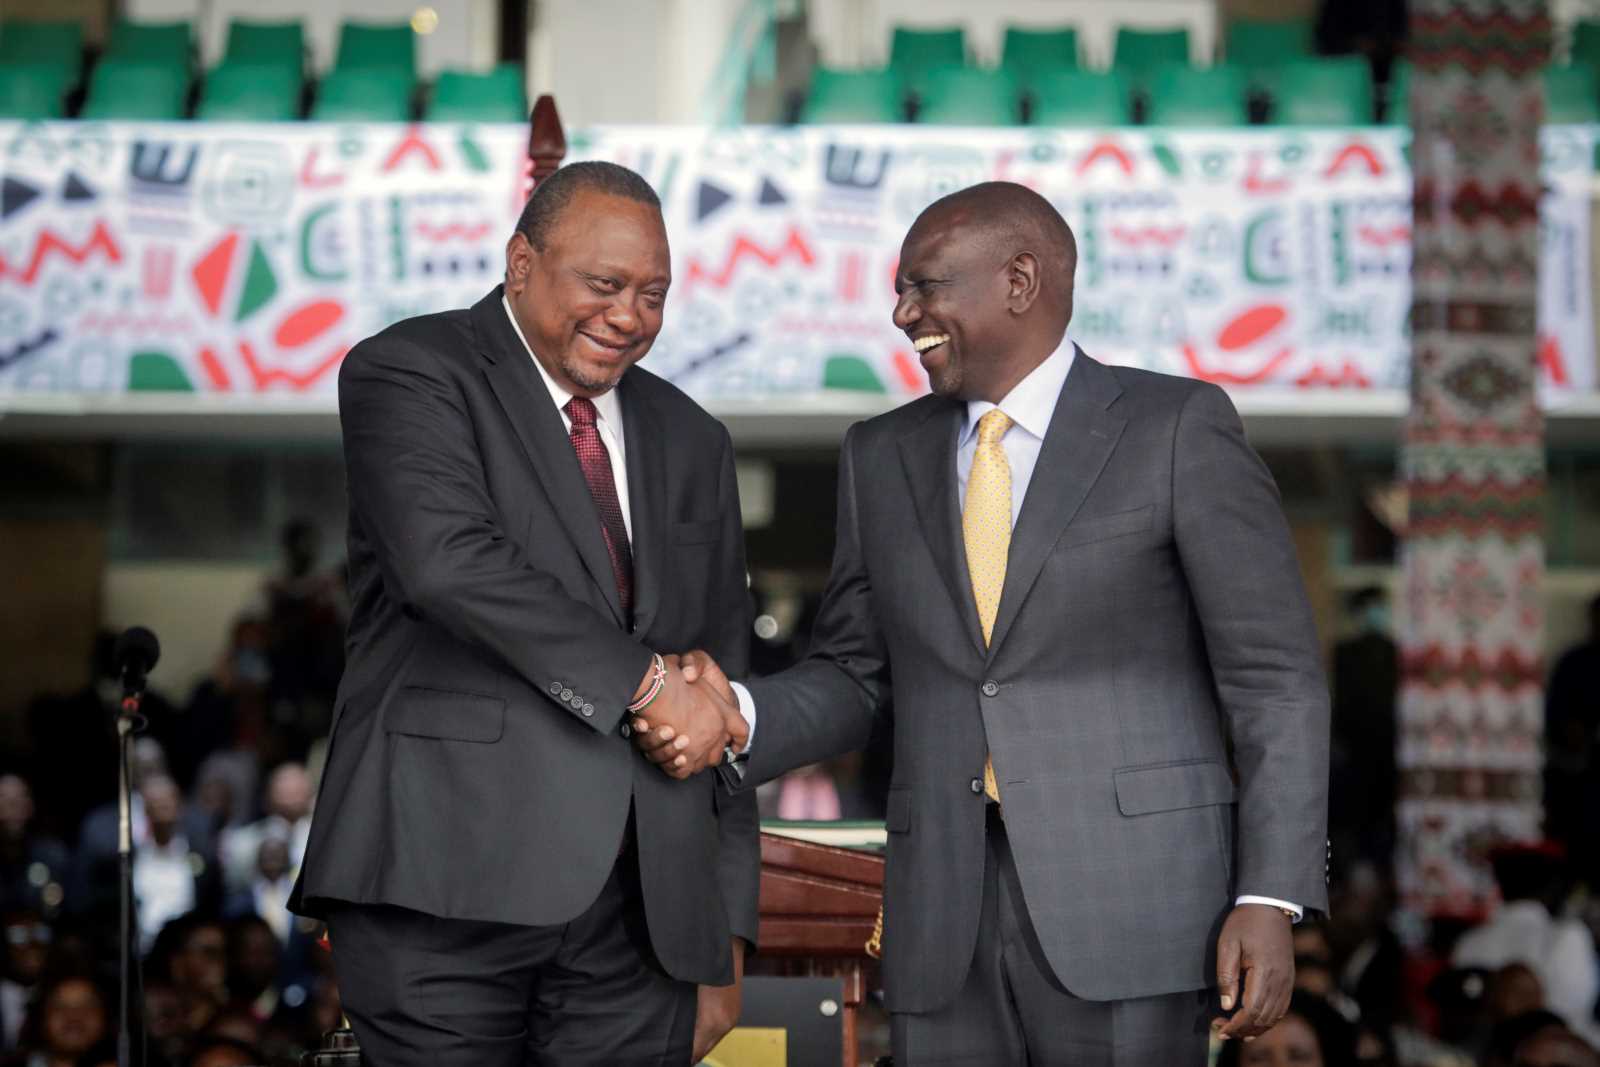 Smiles on inauguration day: President Ruto shaking hands with his predecessor and former boss Kenyatta on 13 September.